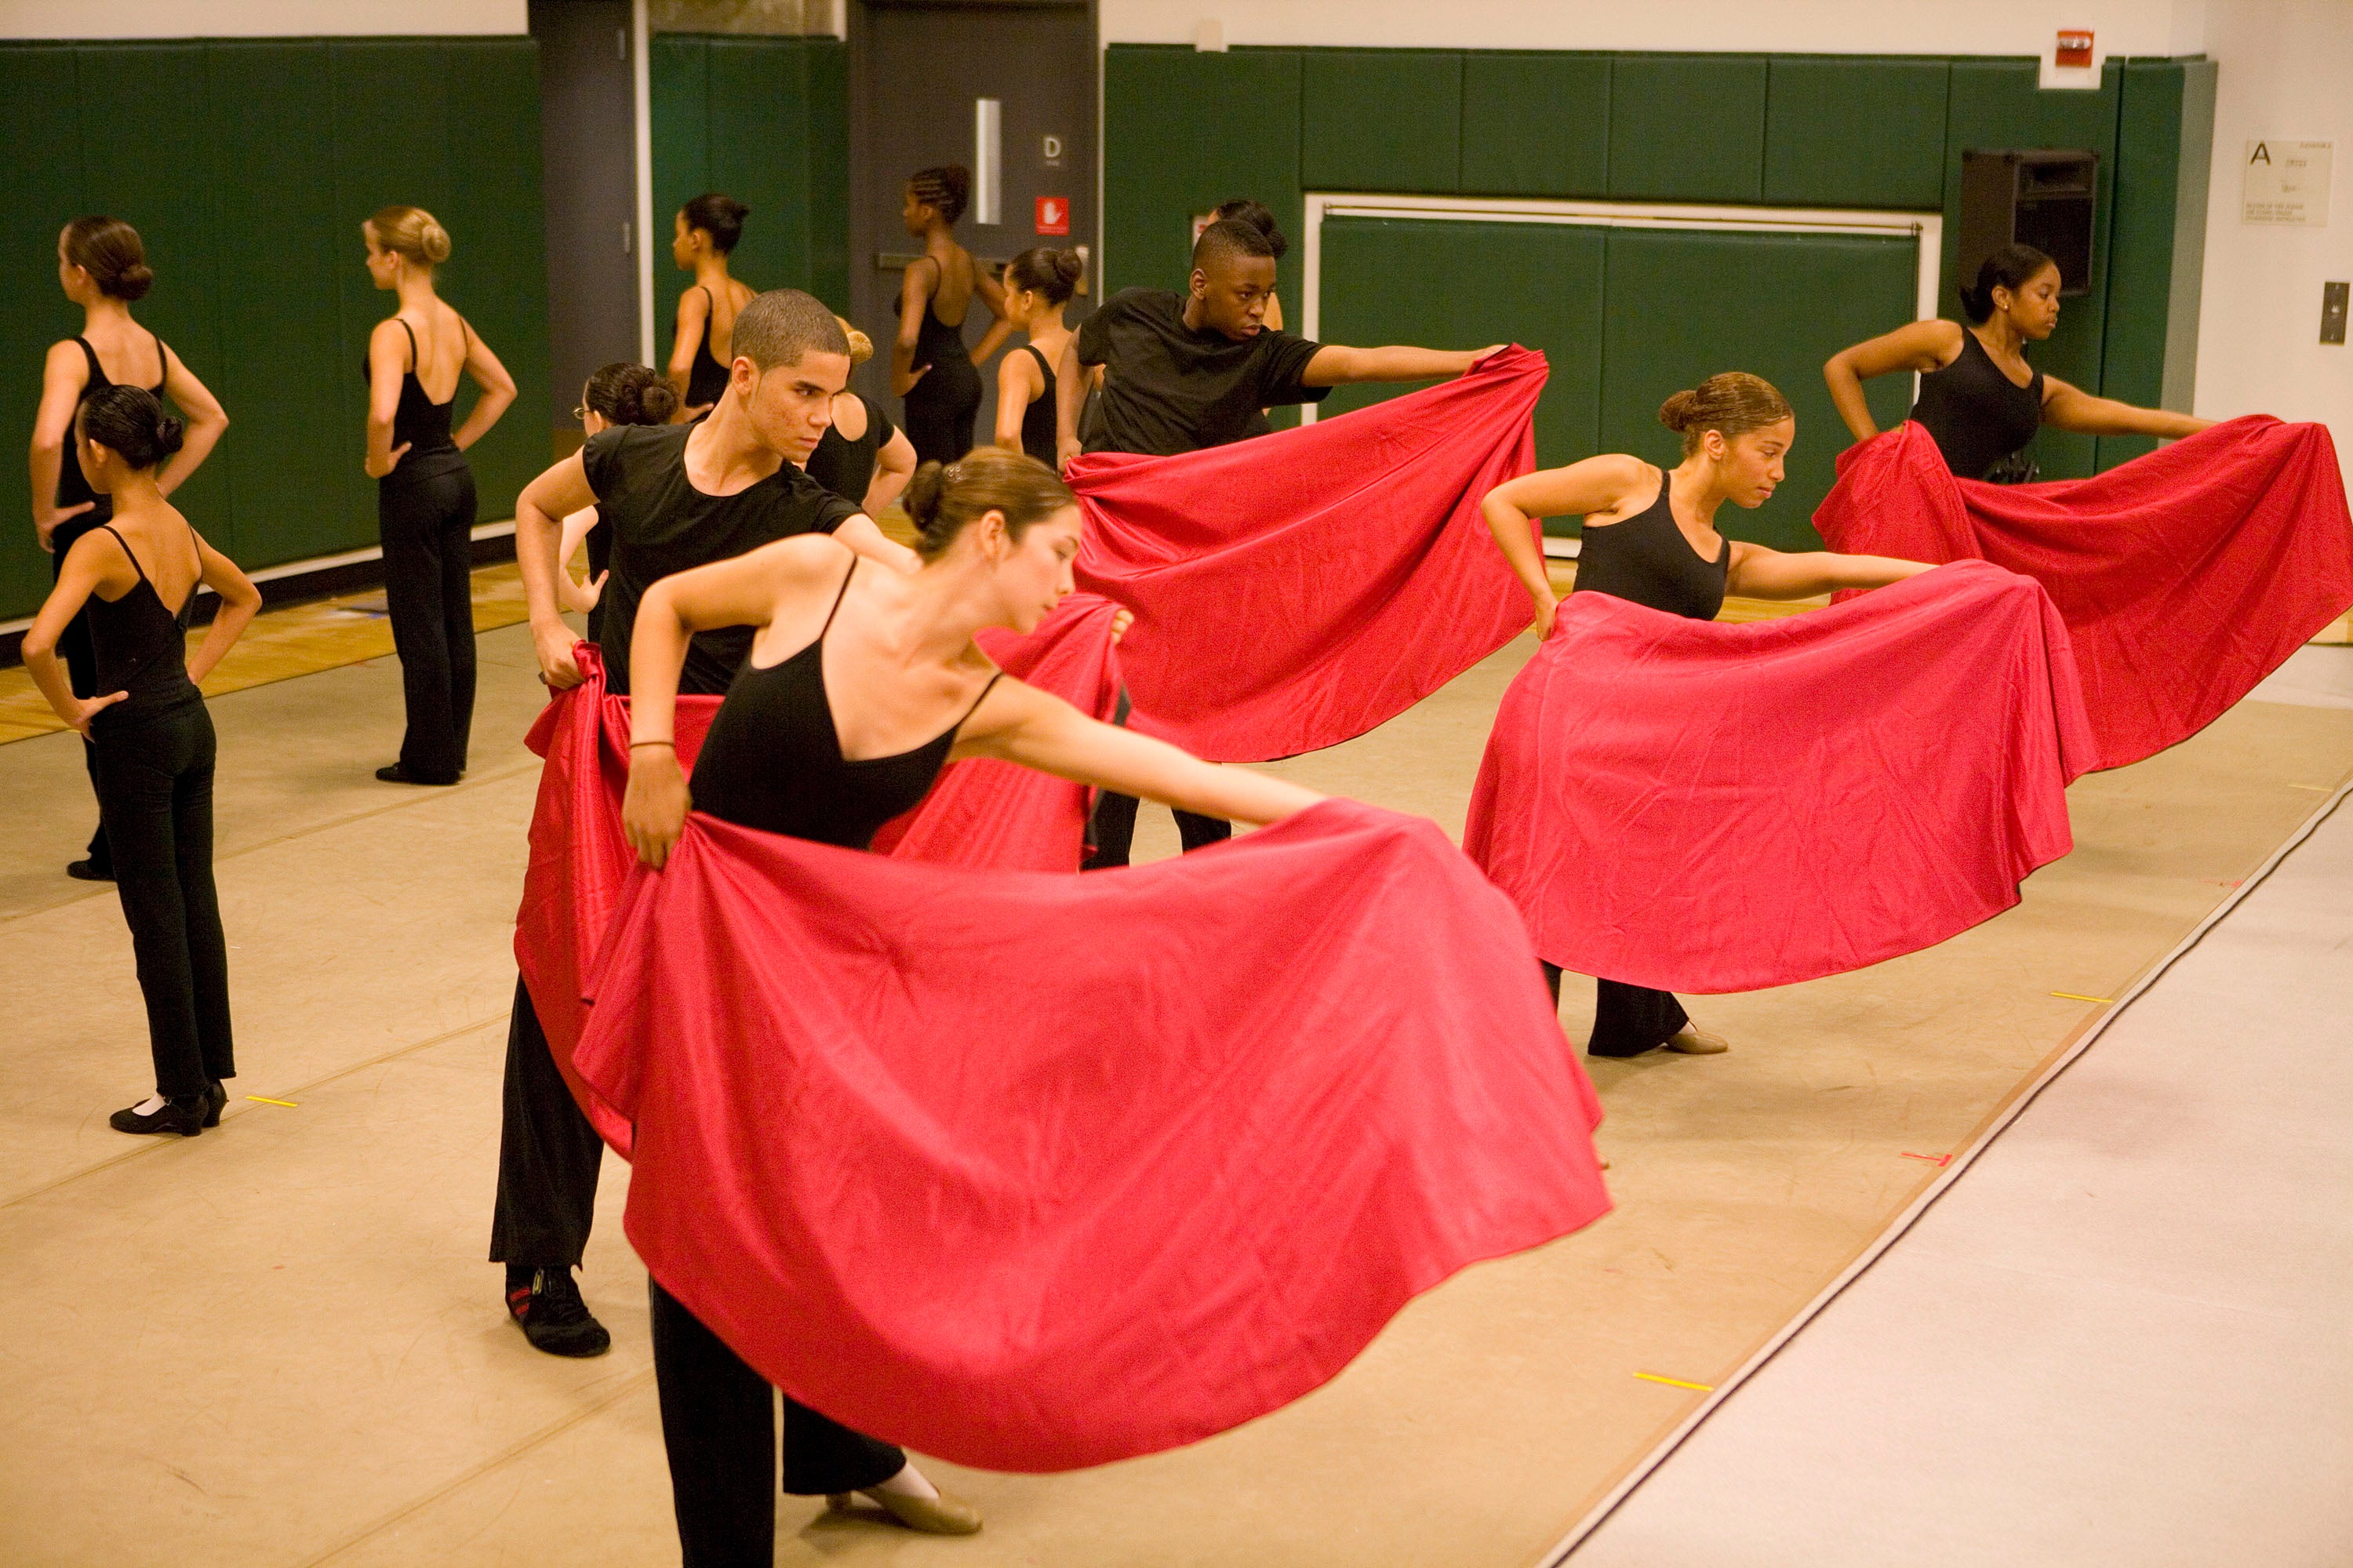 Dancers in black hold out red sheets during their performance practice.